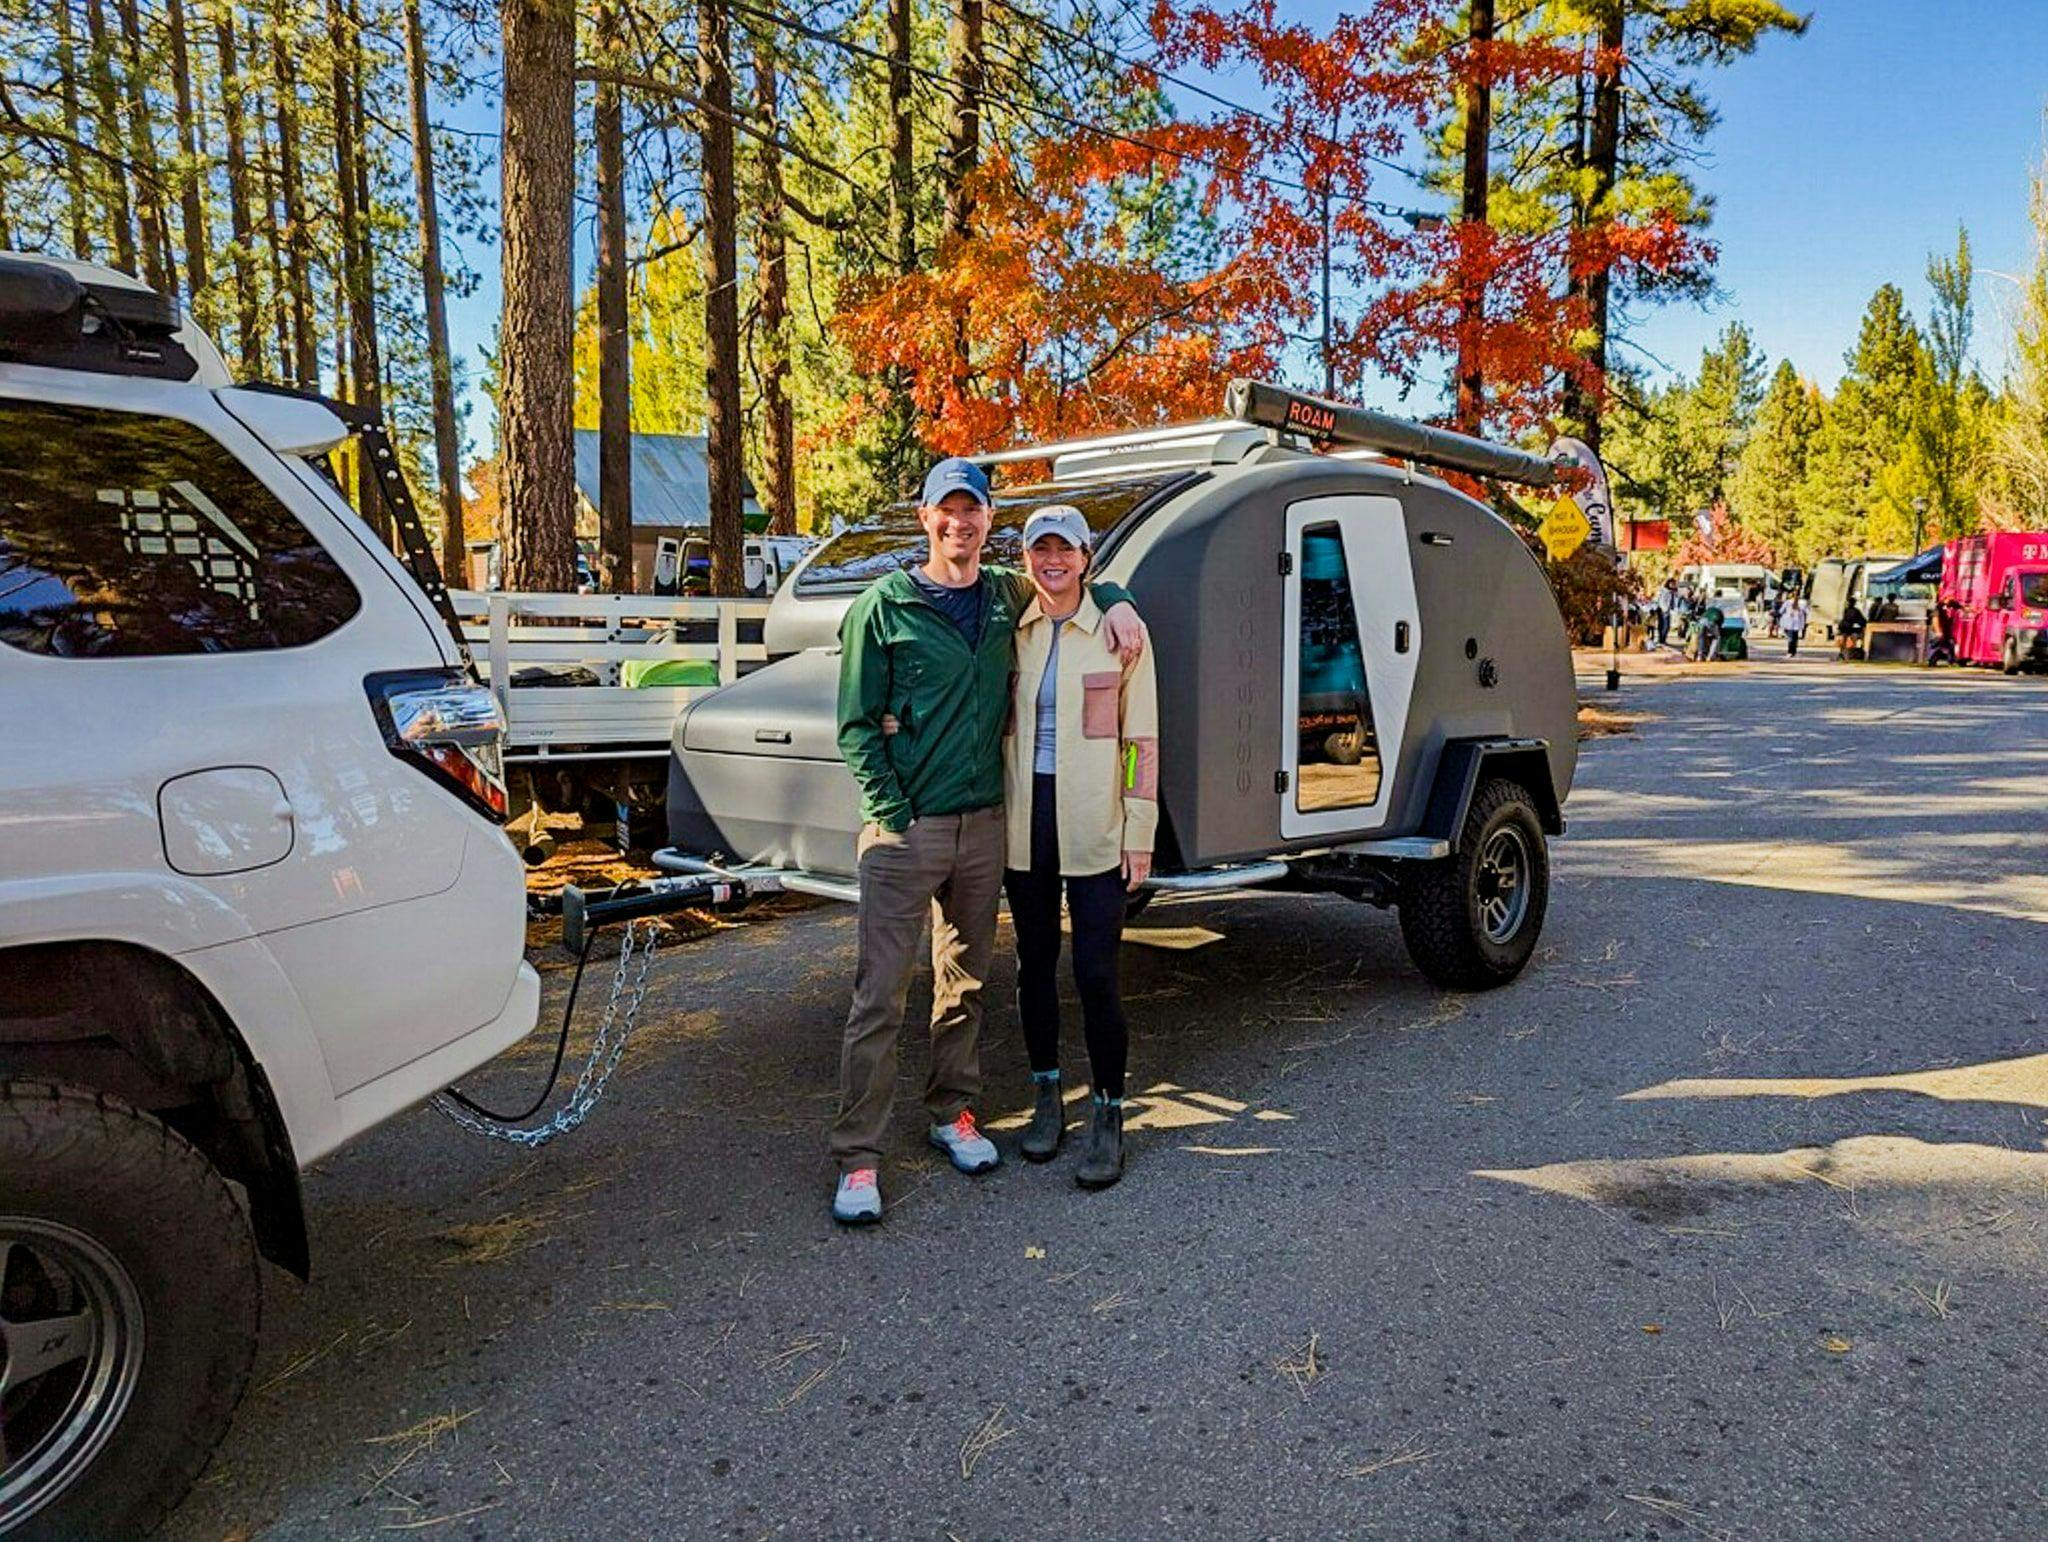 A couple stand in front of a Storm Grey TOPO2, a custom adventure teardrop trailer, by Escapod Trailers, in front of trees with fall leaves.